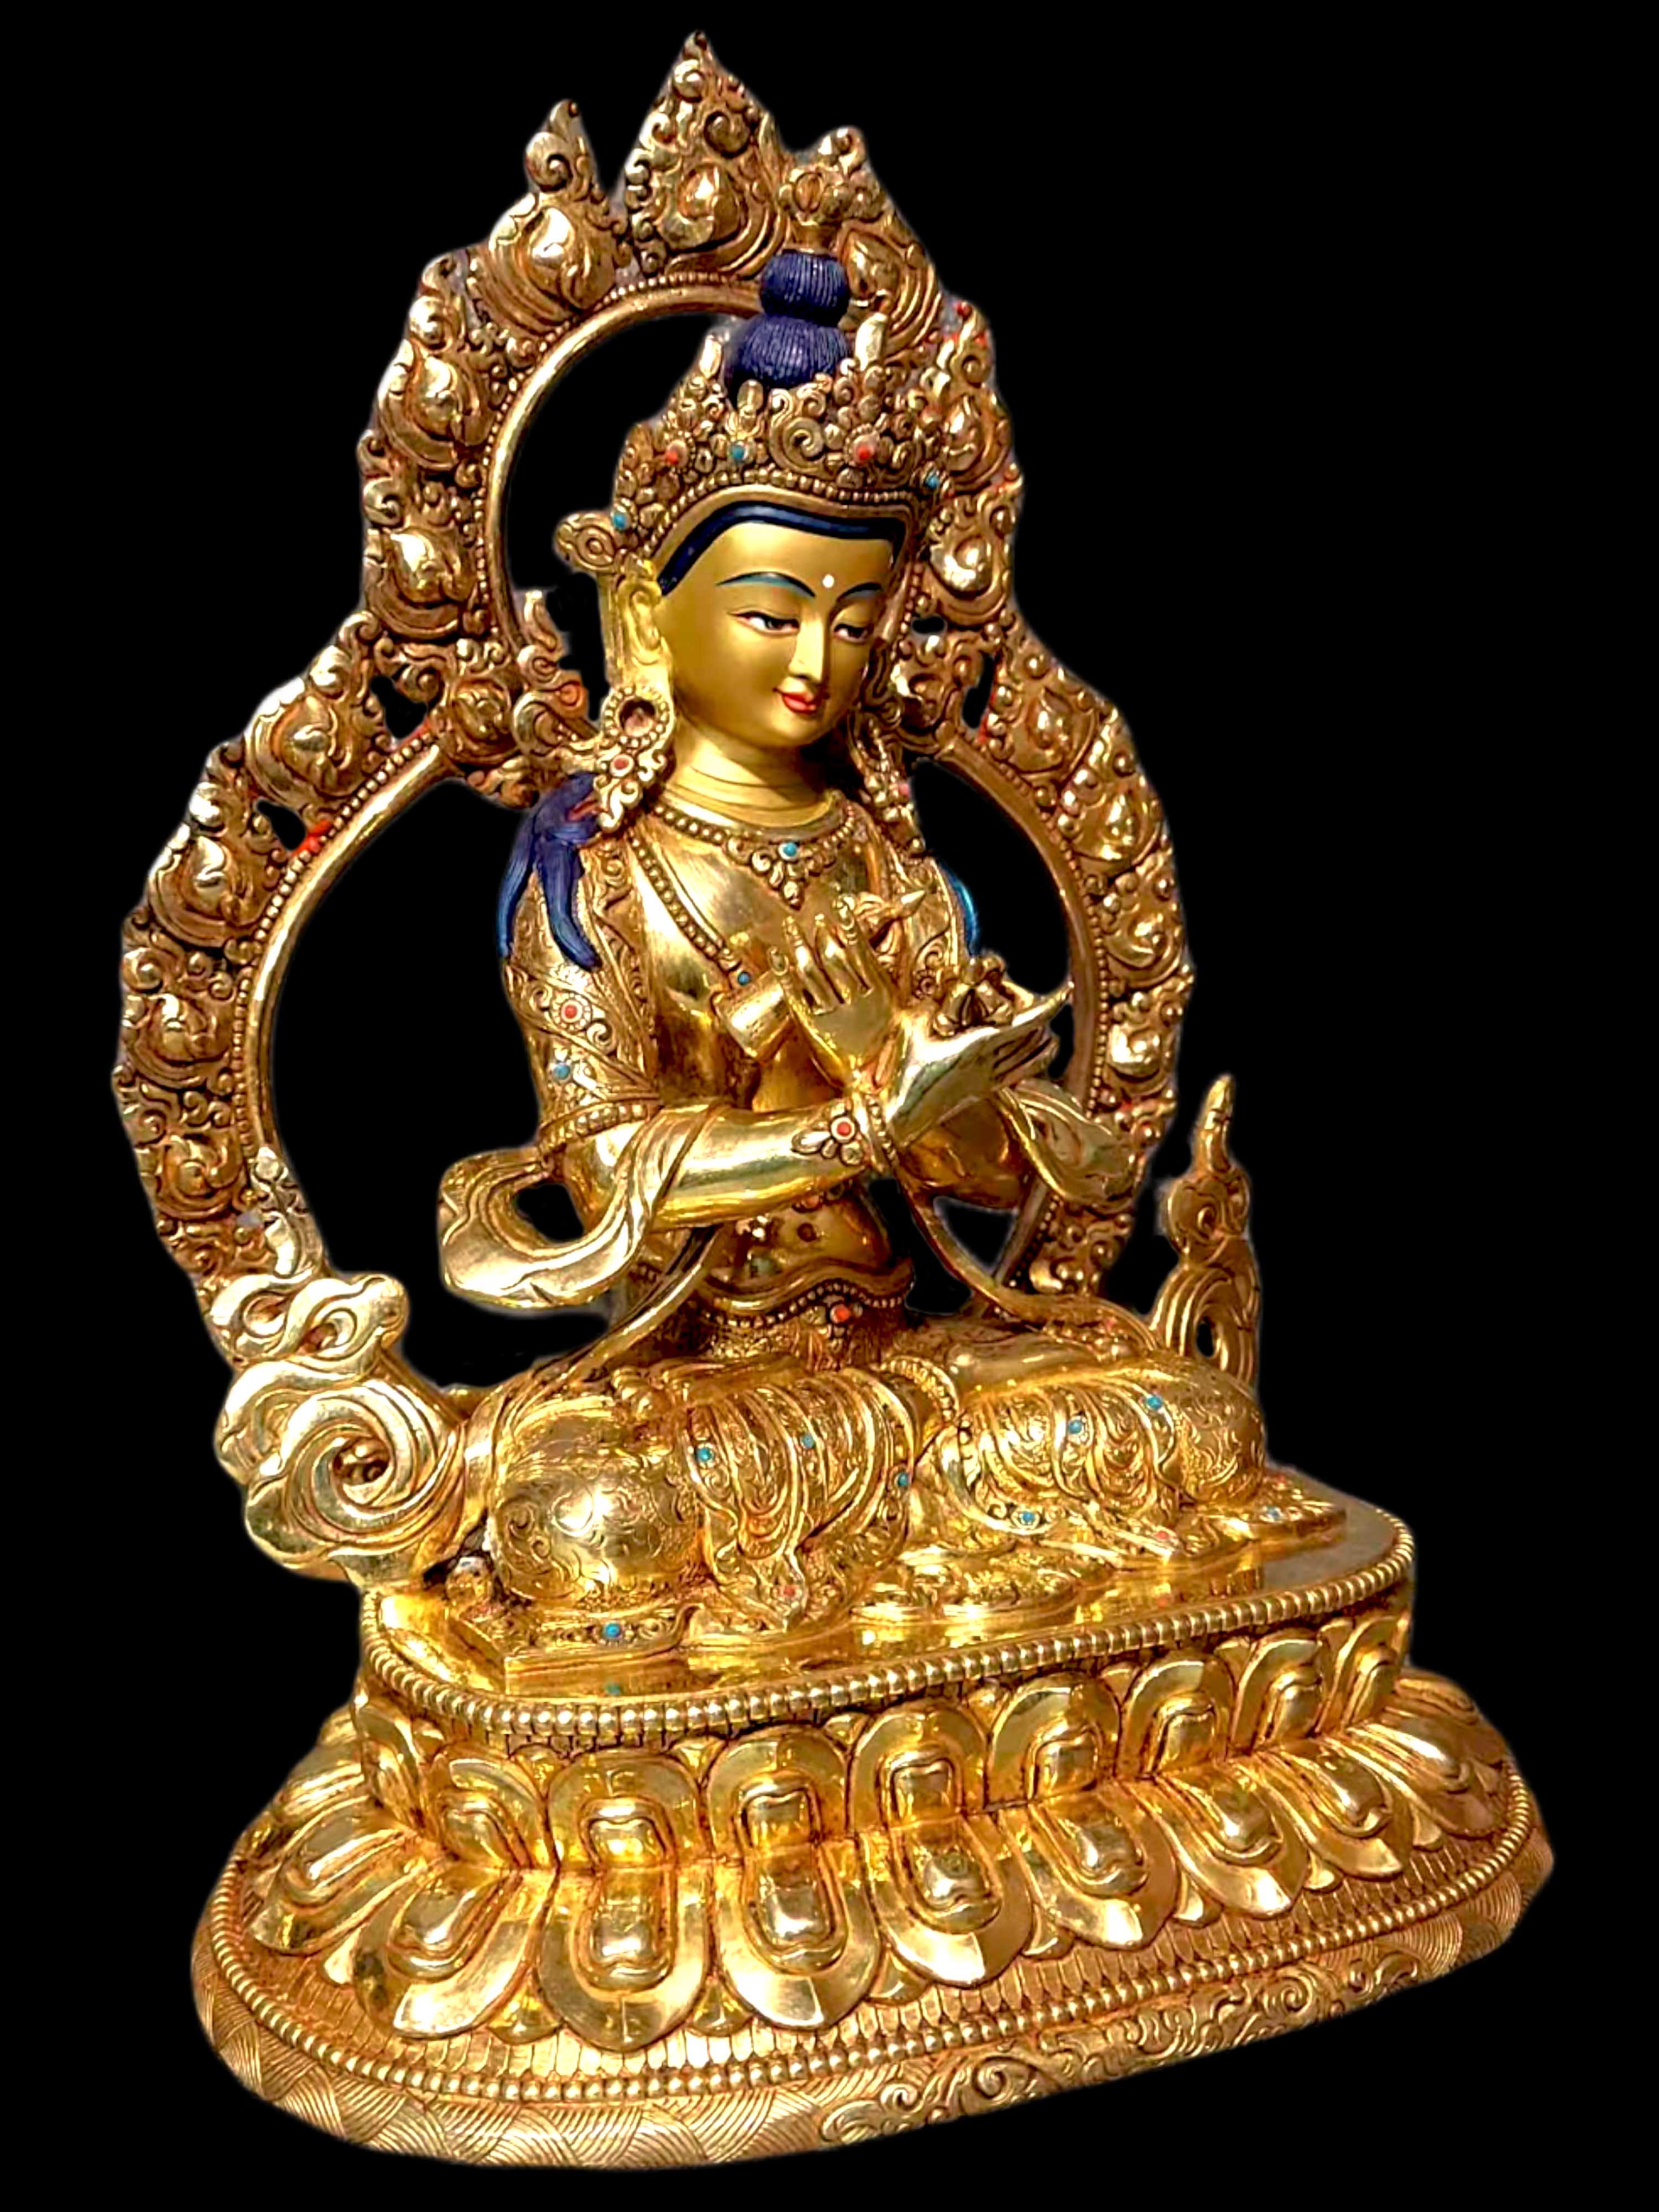 Buddhist Statue Of Vajradhara. full Gold Plated, Stone Setting, Face Painted